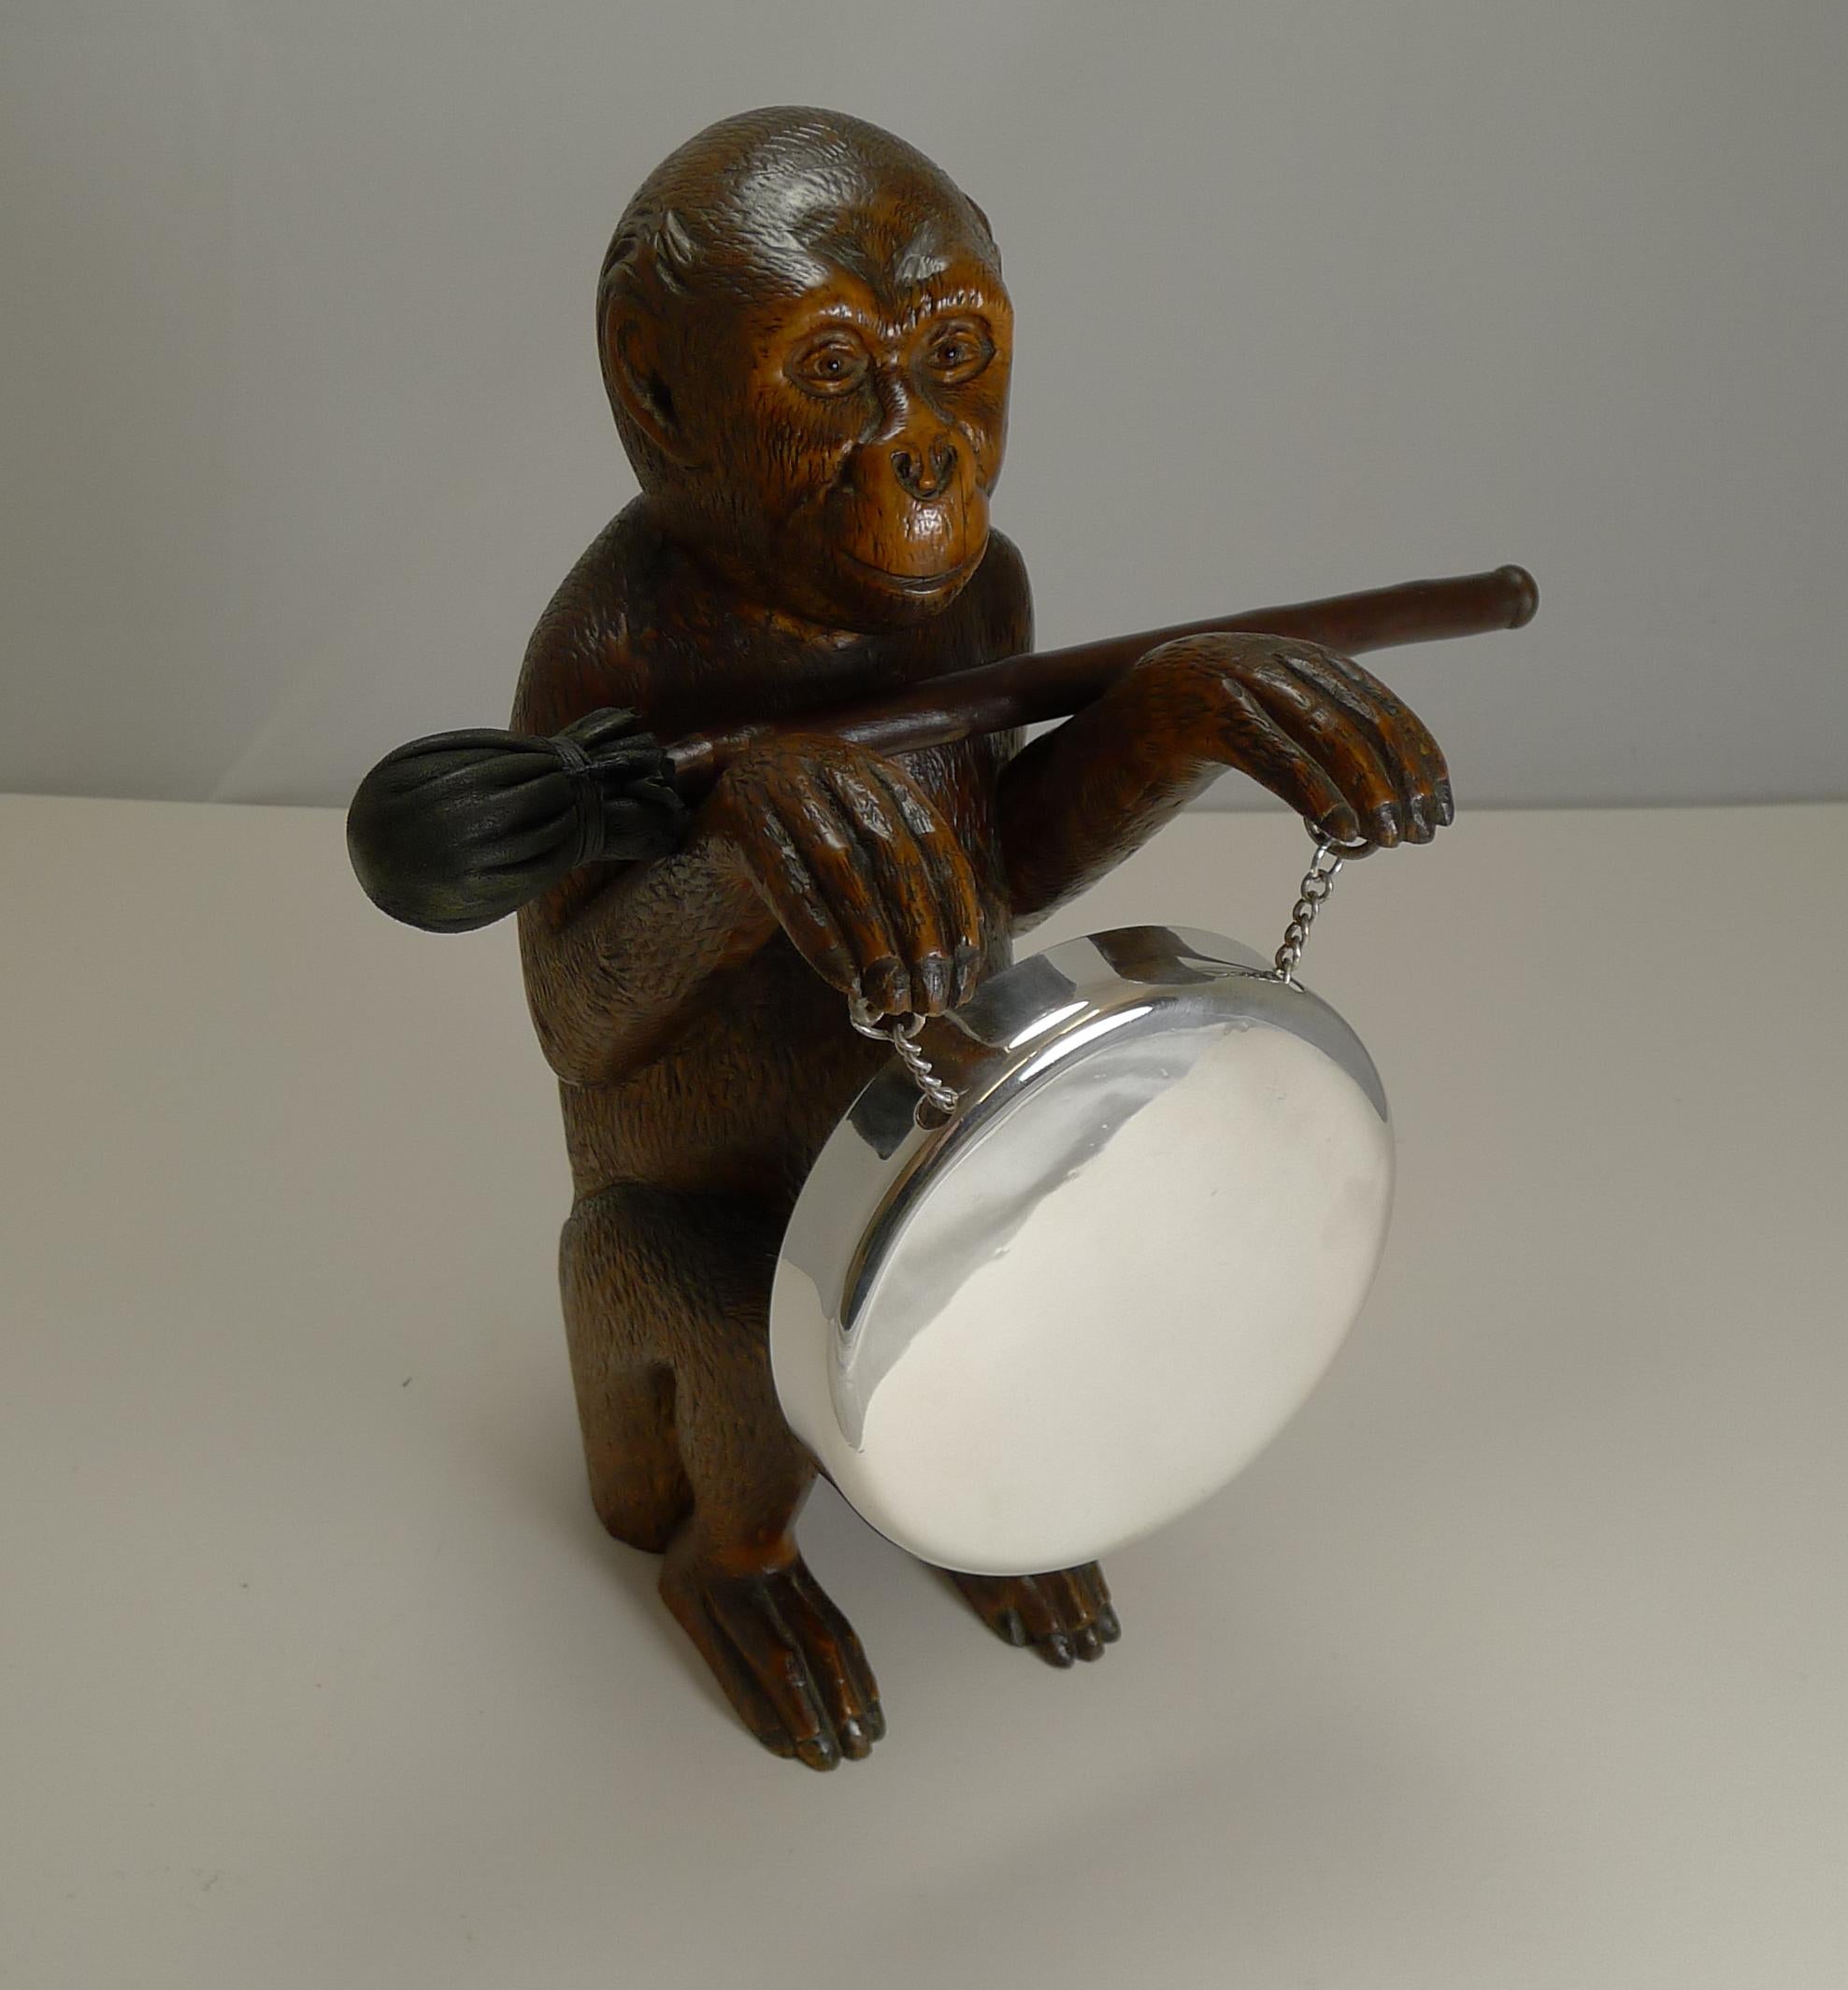 A fabulous and scarce find, this wonderful large Black Forest Monkey was hand carved circa 1890 with superb quality detail and retaining two glass eyes.

The gong is hooked to the underside of his hands and is silver plated.

A grand and unusual